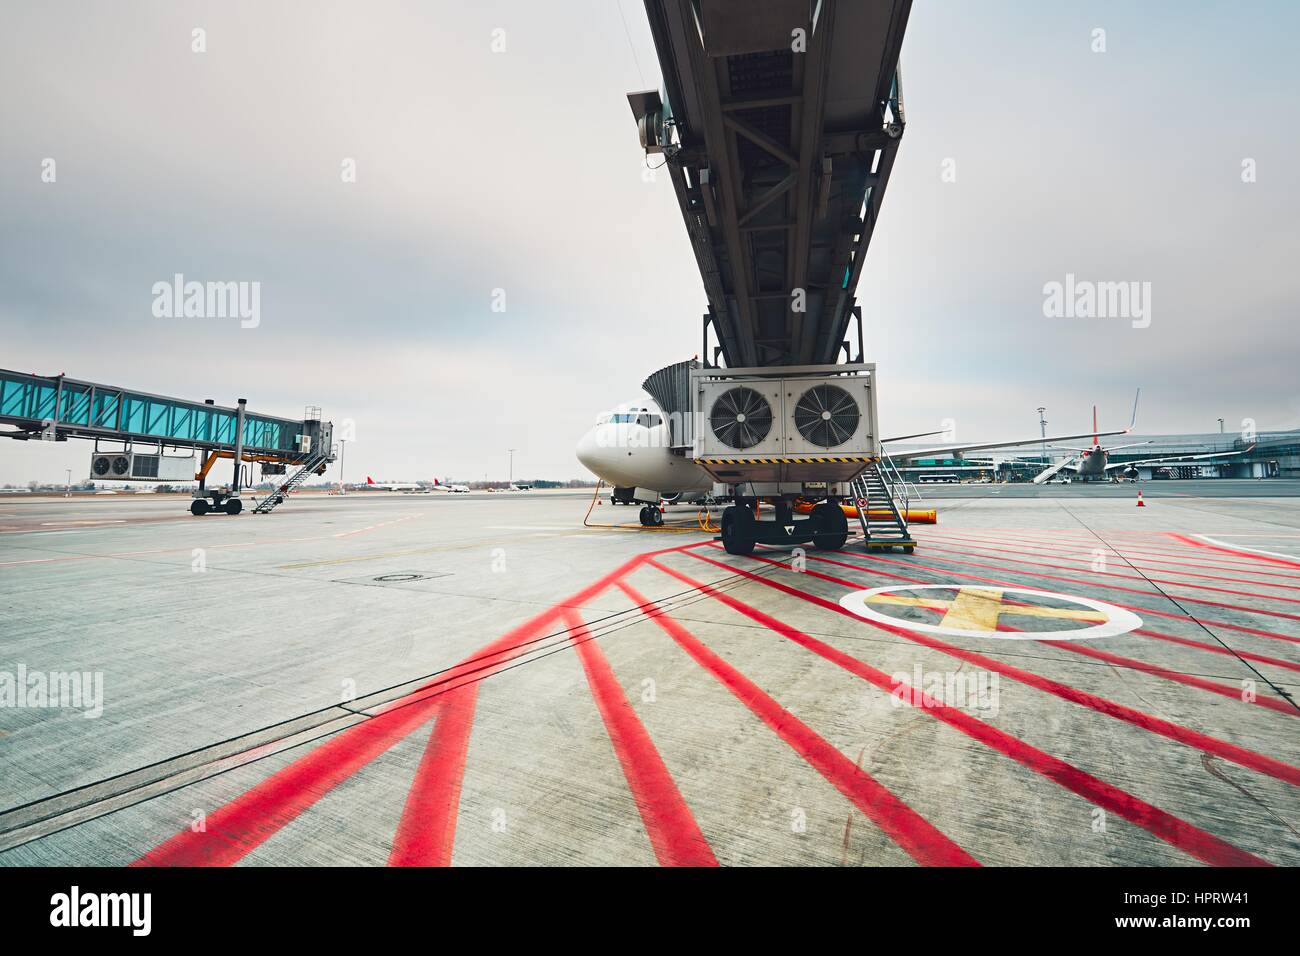 Daily life at the international airport. Preparation of the airplane before flight. Stock Photo